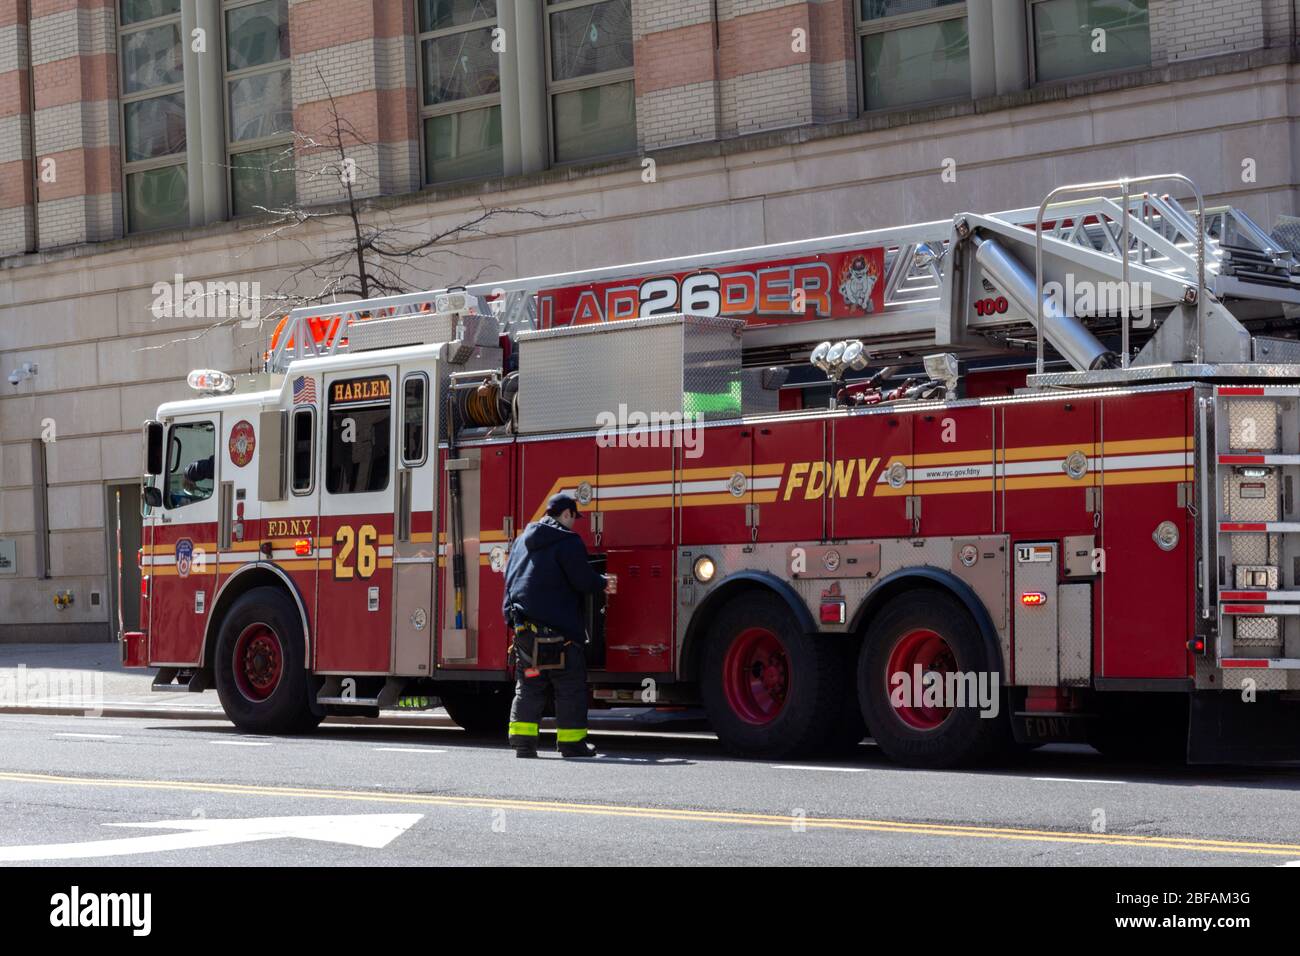 a fireman standing next to a fire engine lorry. It reads ladder 26 Harlem, part of the Fire Department of New York or FDNY Stock Photo